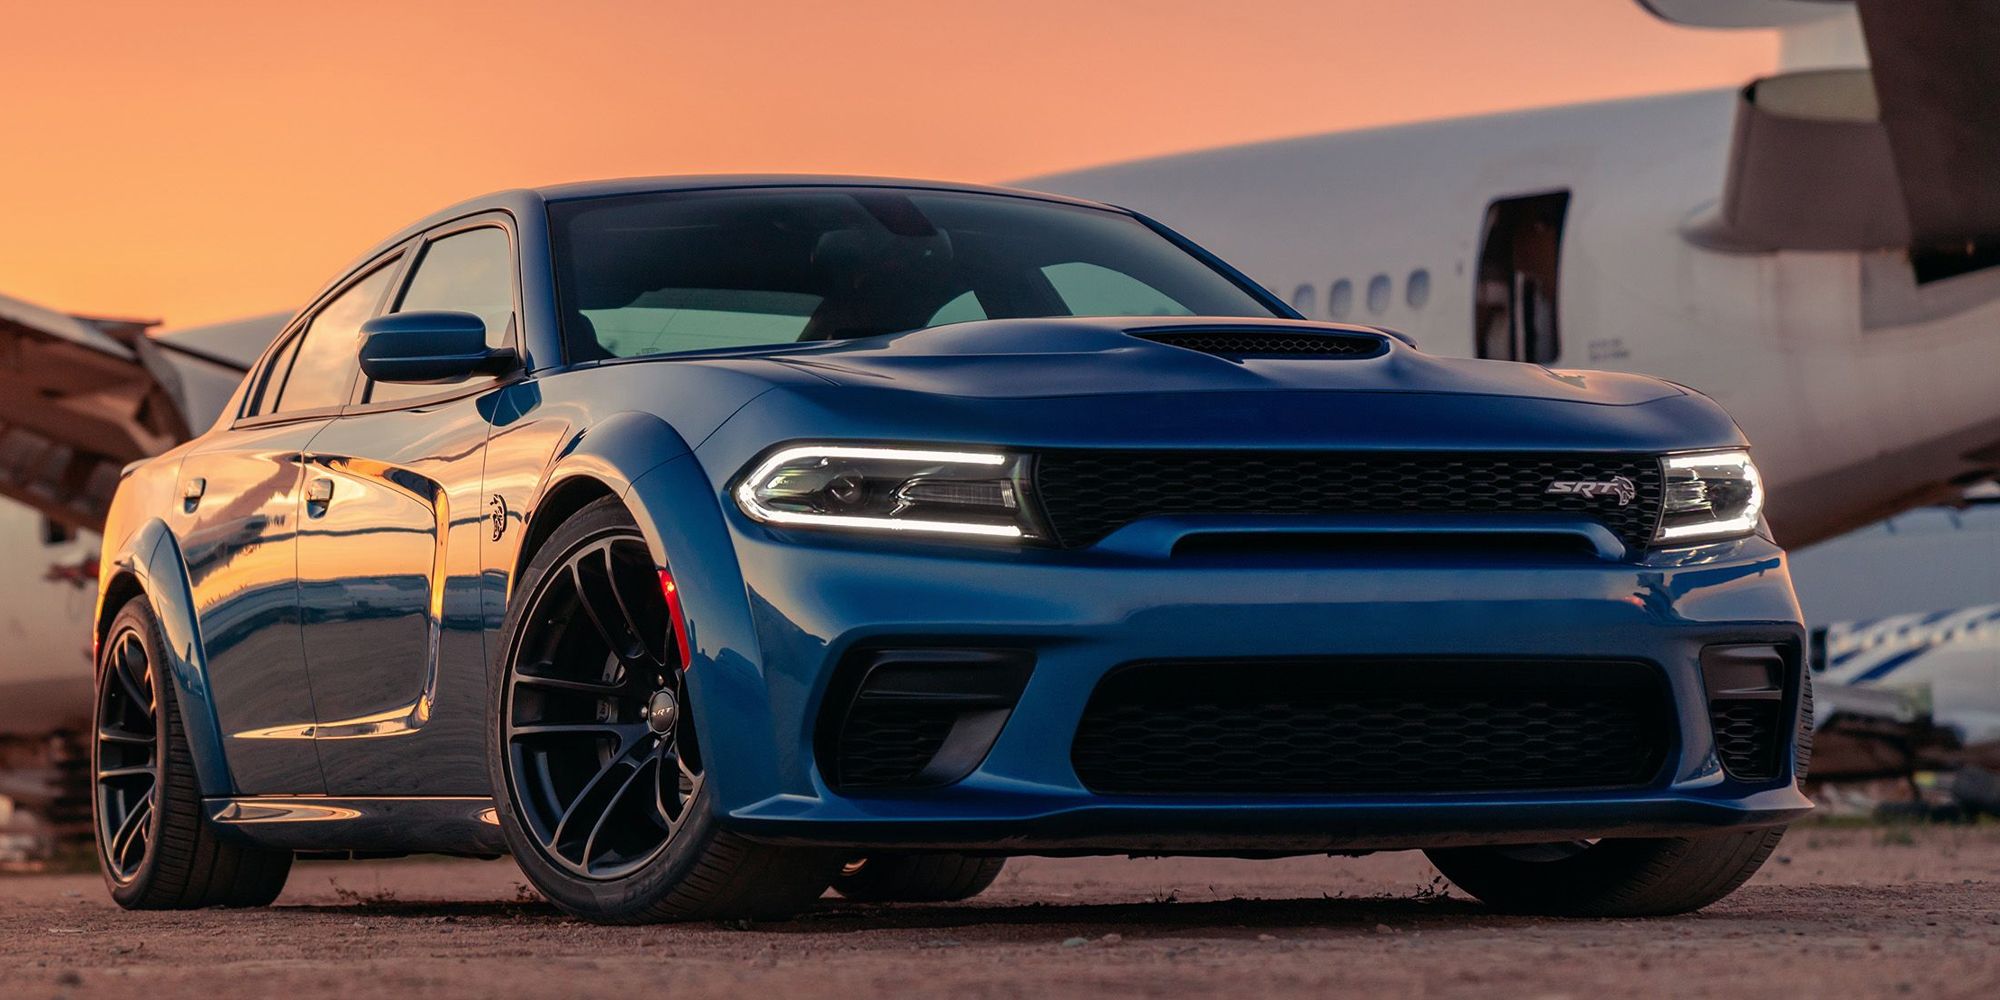 A blue Charger Hellcat, front view